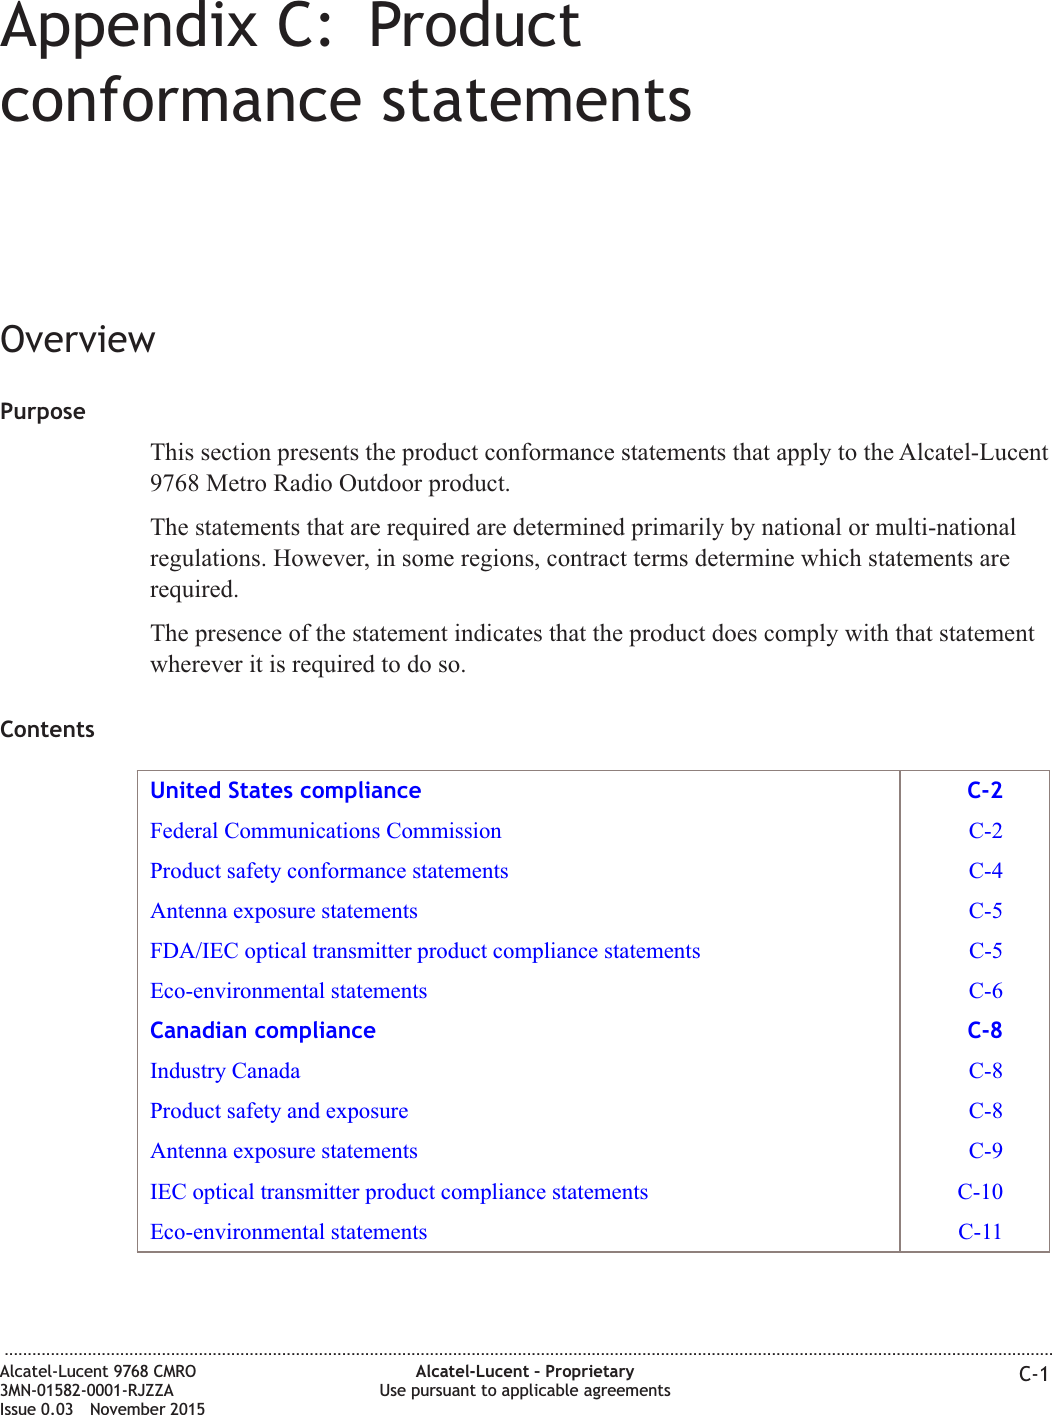 Appendix C: Productconformance statementsOverviewPurposeThis section presents the product conformance statements that apply to the Alcatel-Lucent9768 Metro Radio Outdoor product.The statements that are required are determined primarily by national or multi-nationalregulations. However, in some regions, contract terms determine which statements arerequired.The presence of the statement indicates that the product does comply with that statementwherever it is required to do so.ContentsUnited States compliance C-2Federal Communications Commission C-2Product safety conformance statements C-4Antenna exposure statements C-5FDA/IEC optical transmitter product compliance statements C-5Eco-environmental statements C-6Canadian compliance C-8Industry Canada C-8Product safety and exposure C-8Antenna exposure statements C-9IEC optical transmitter product compliance statements C-10Eco-environmental statements C-11...................................................................................................................................................................................................................................Alcatel-Lucent 9768 CMRO3MN-01582-0001-RJZZAIssue 0.03 November 2015Alcatel-Lucent – ProprietaryUse pursuant to applicable agreements C-1DRAFTDRAFT